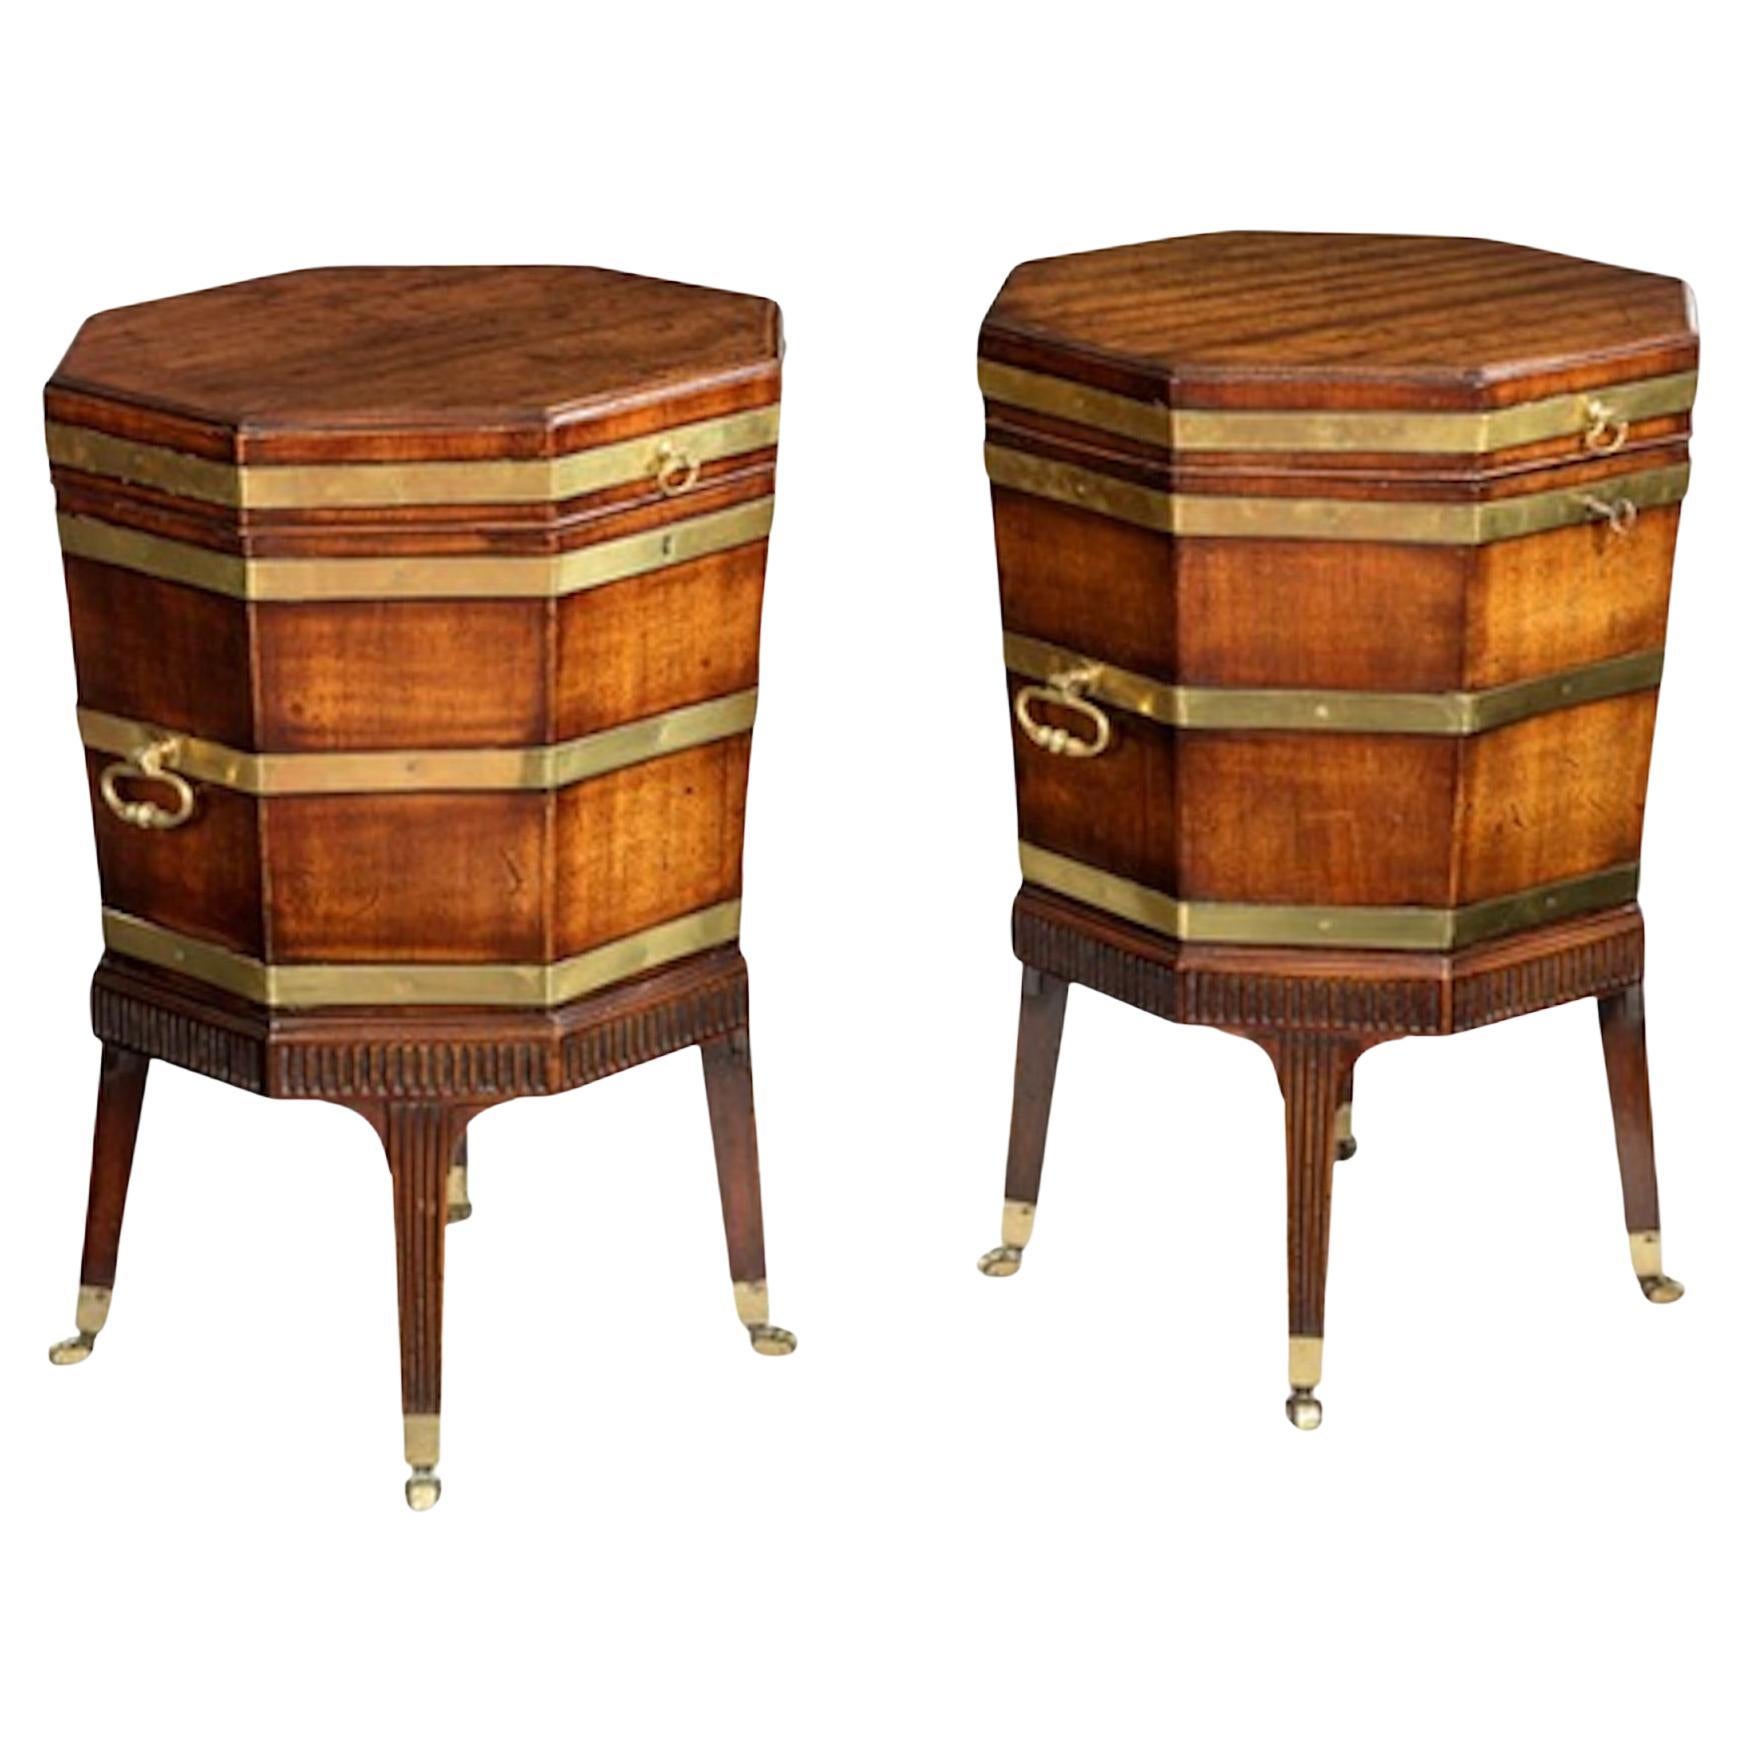 Rare pair of 18th century mahogany wine coolers/cellerets